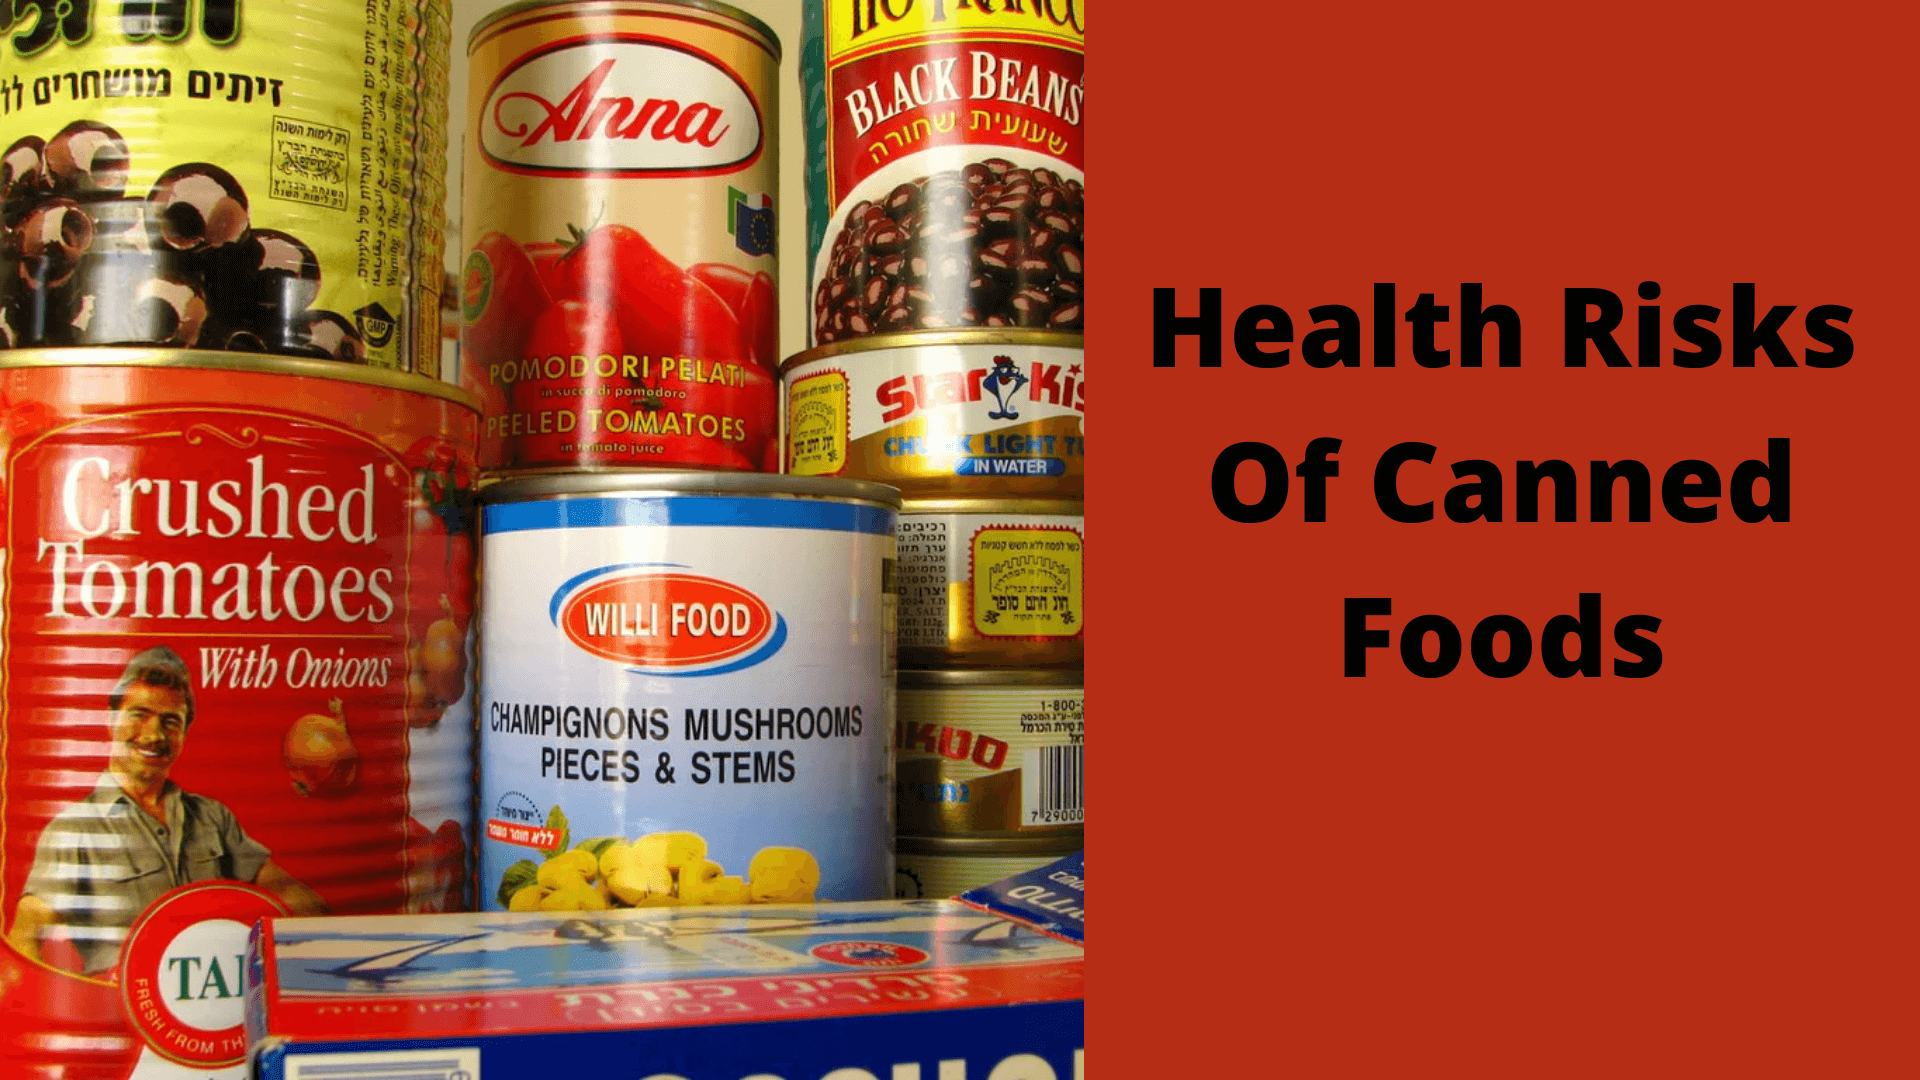 Health Risks Of Canned Foods (2) (1)